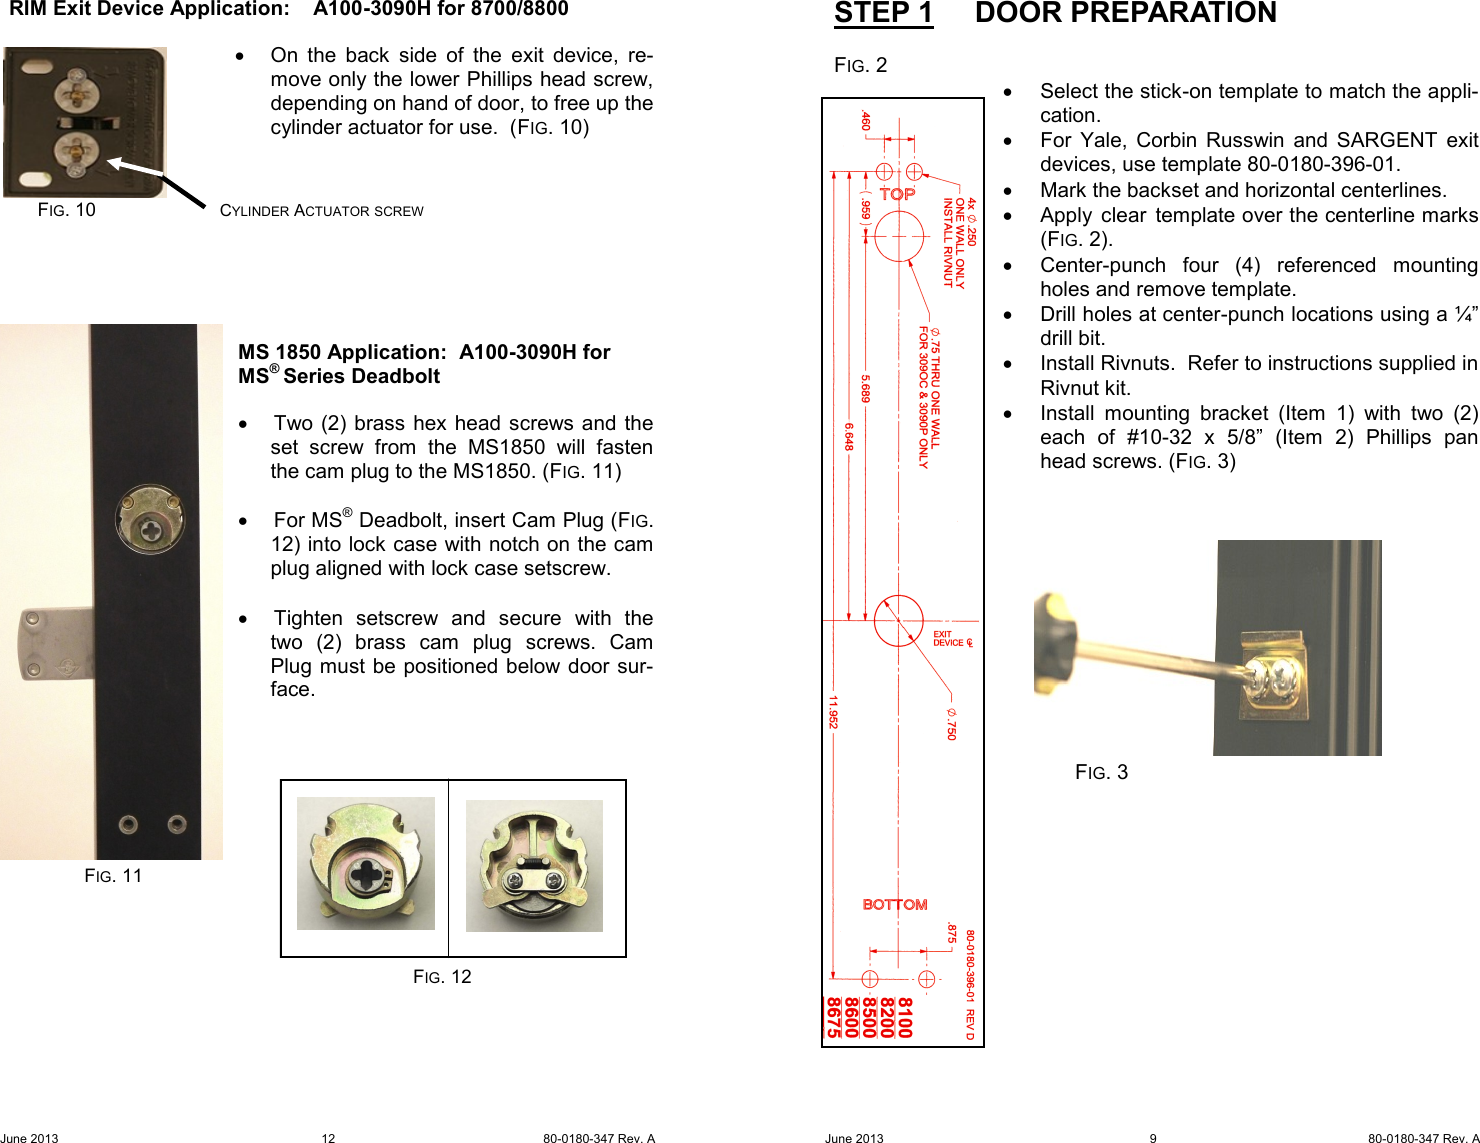 Page 9 of 10 - Adams Rite  A100-3090 Owner's Manual & Installation Instructions A100-3090H 80-0180-347 A